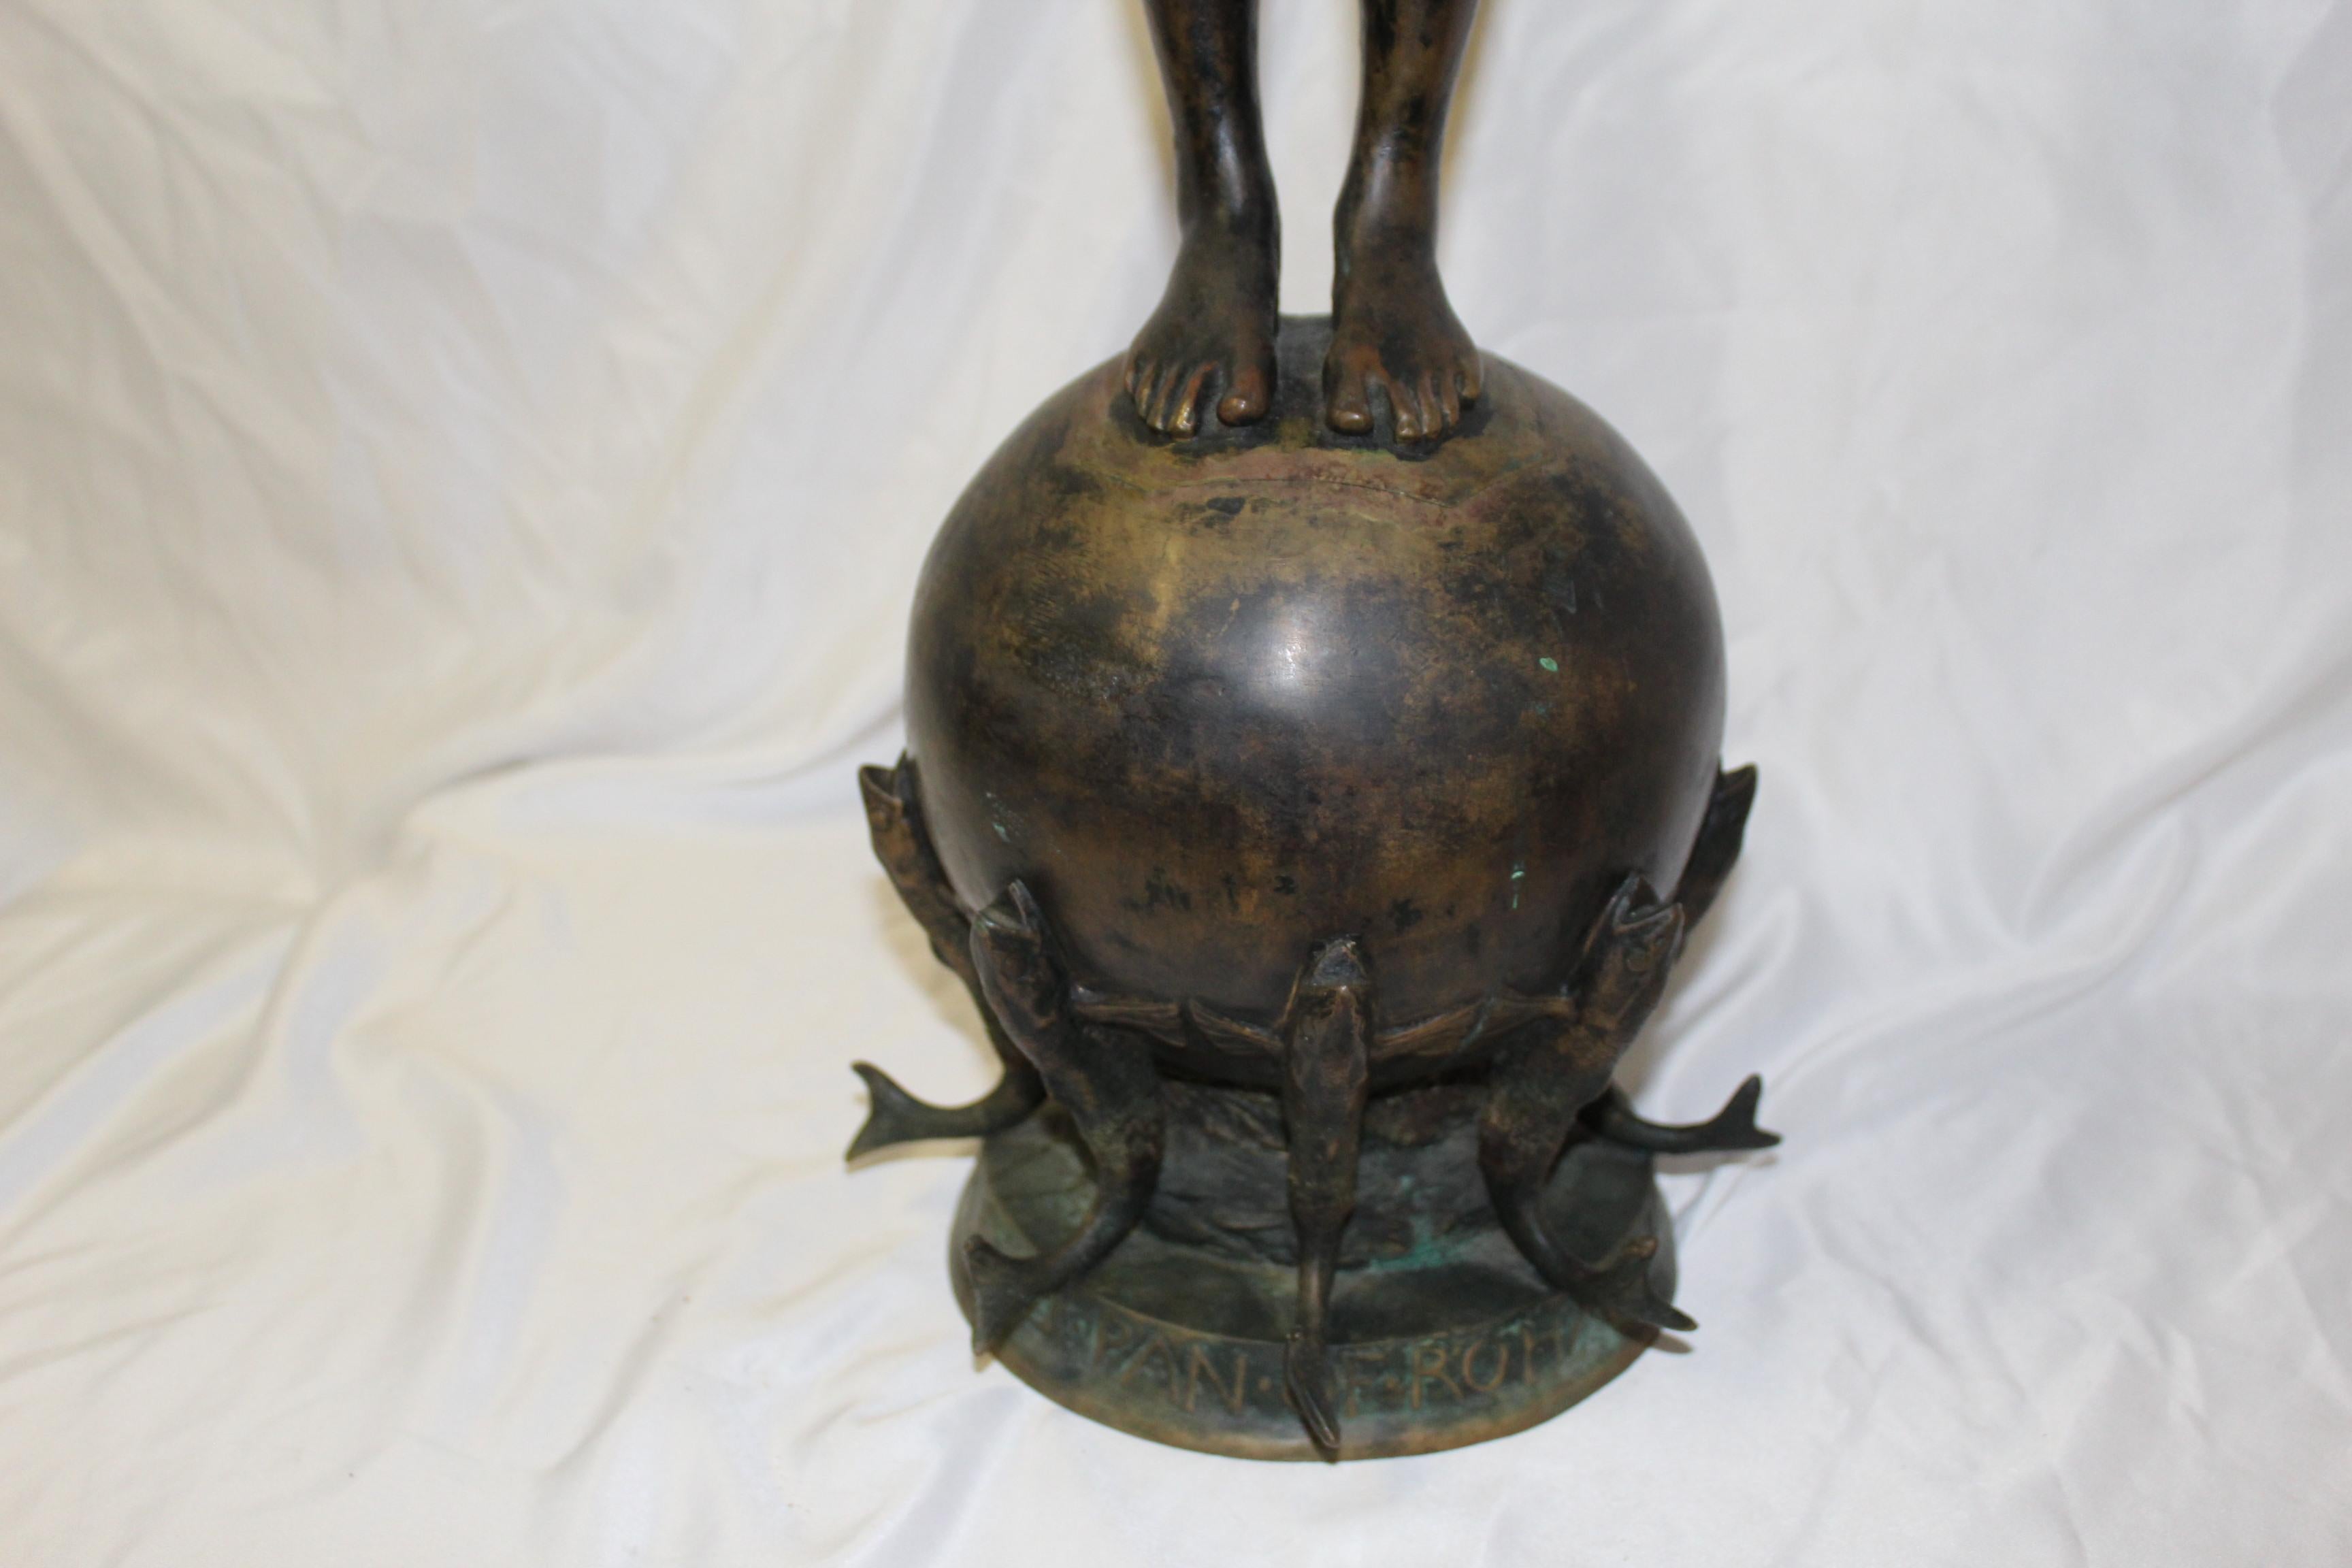 A pan boy standing on a ball supported by Fish around the base. Has the two flutes. Signed on the base Frederick William Mac Monies and dated 1890 and with the Foundry seal. Has the letters on the base (M.D.C.C.C.L.X.L.) One sold at Rago’s Auction